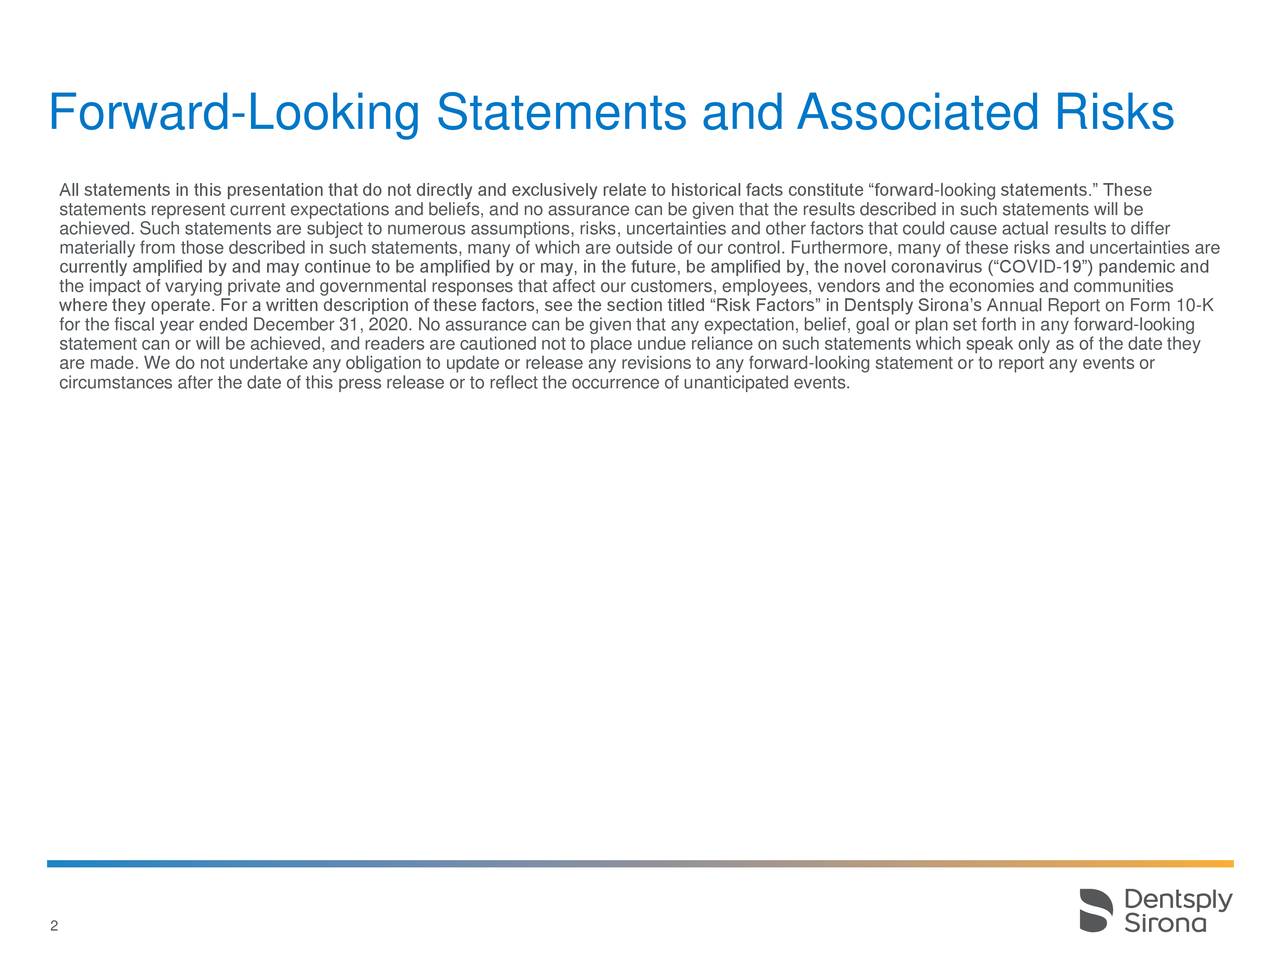 Forward-Looking Statements and Associated Risks